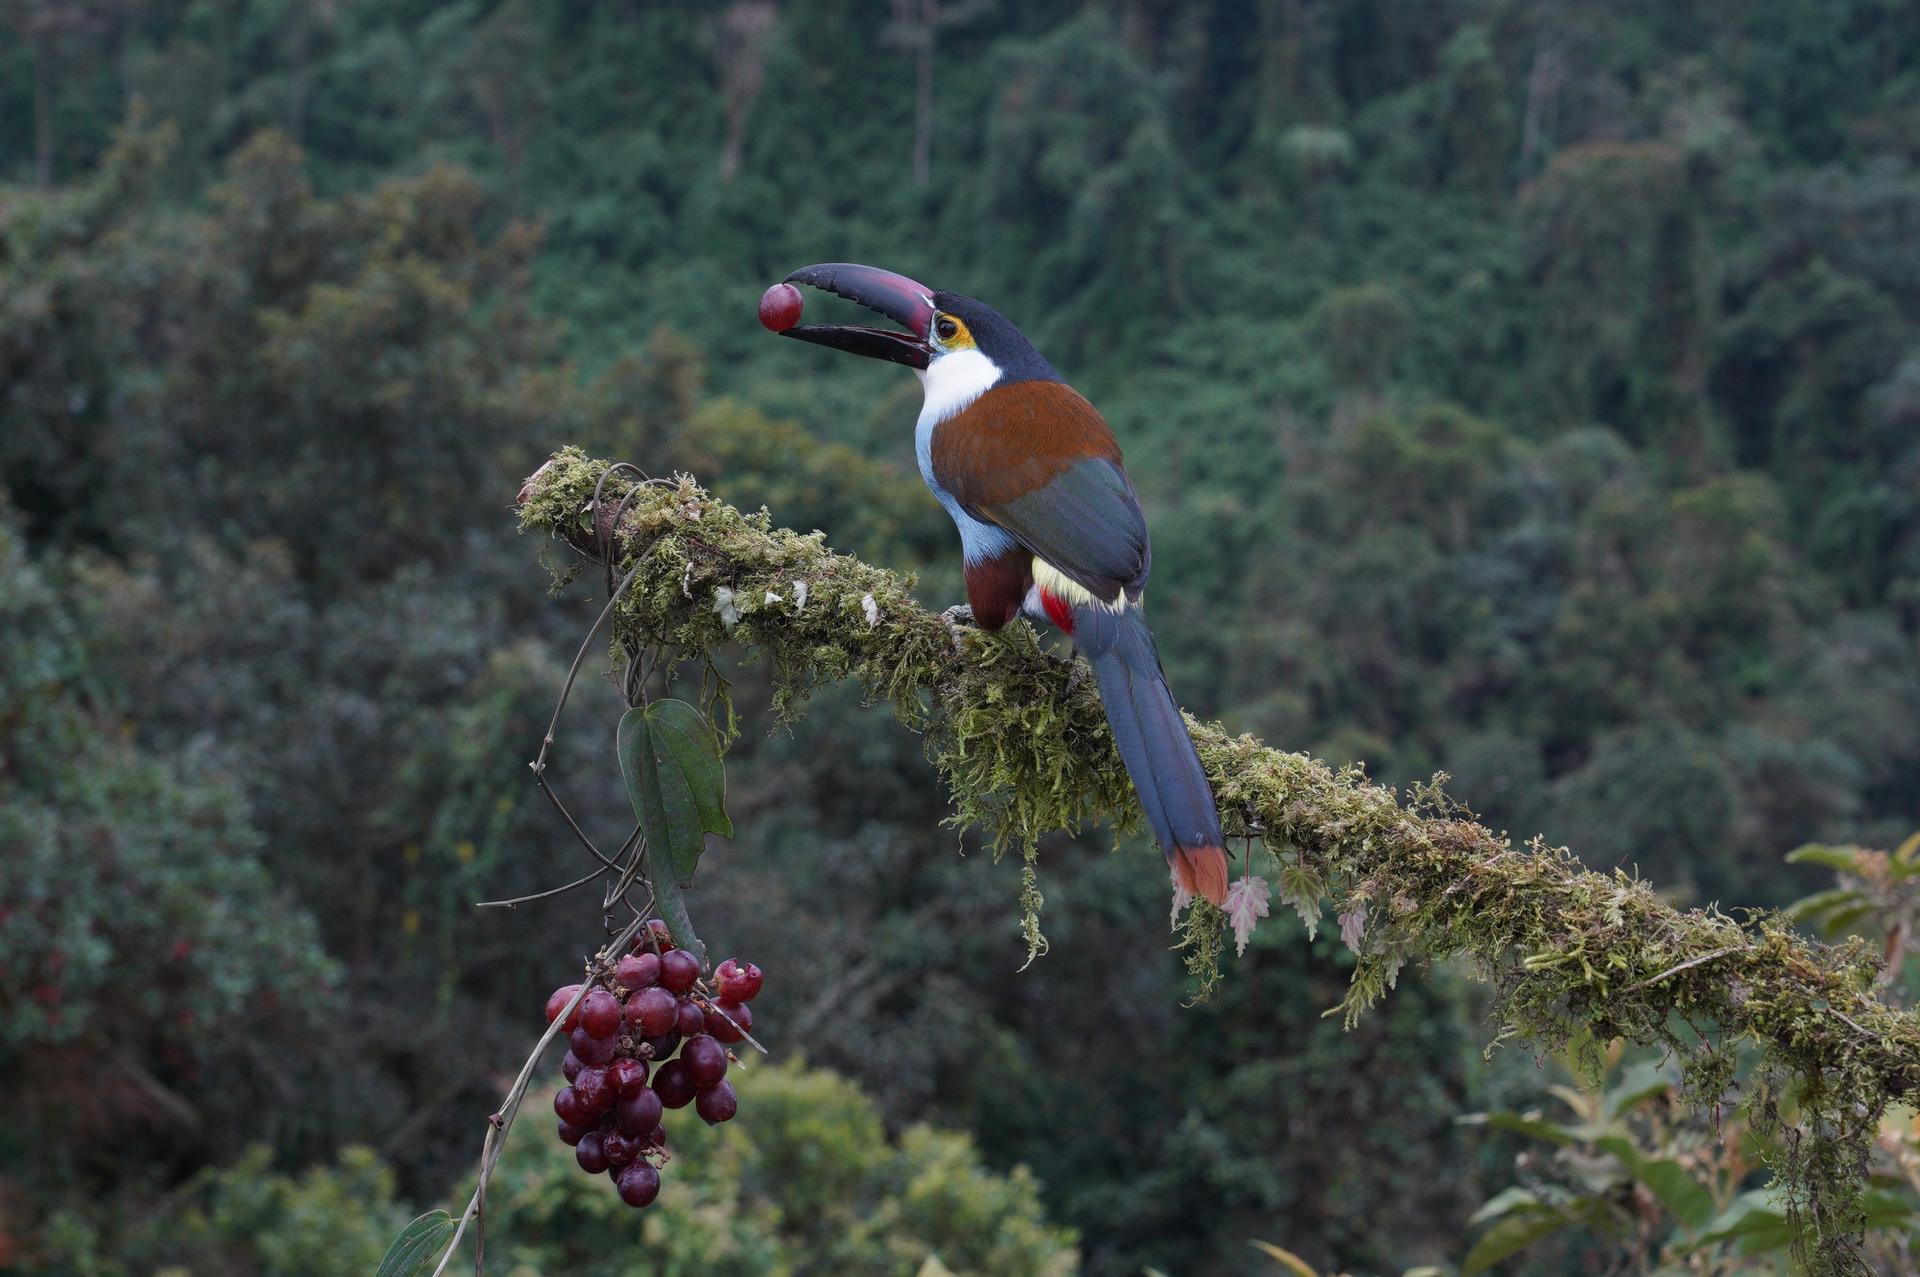 The Black Billed Mountain Toucan is one of the main attractions at El Color de Mis Reves, or the Color of My Dreams,  a birdwatching lodge near Manizales, Colombia.